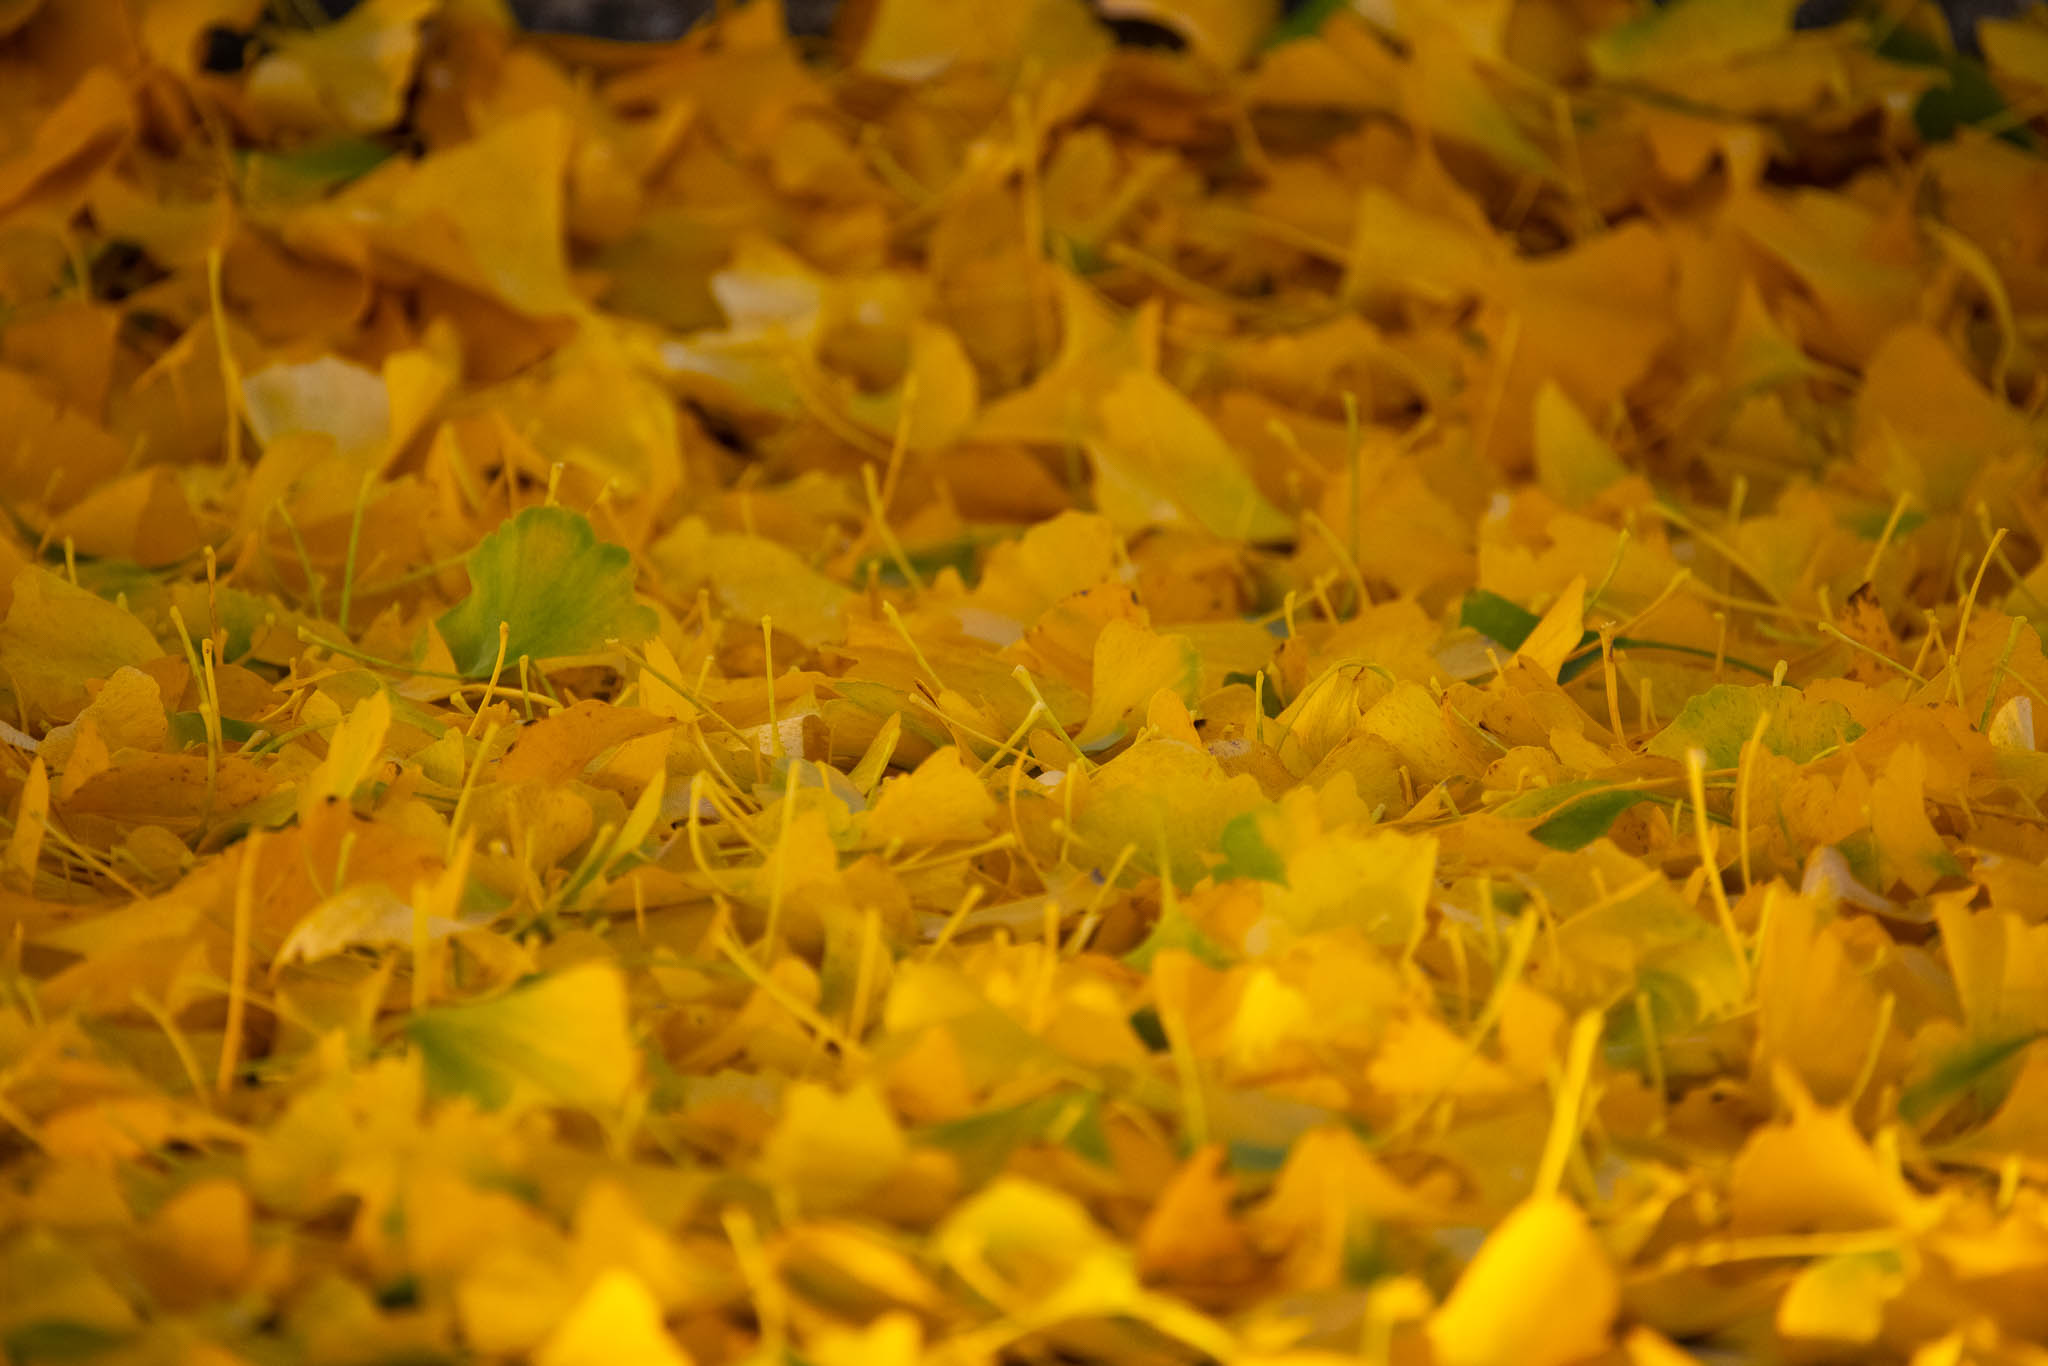 A close-up photo of the yellow leaves on the ground.